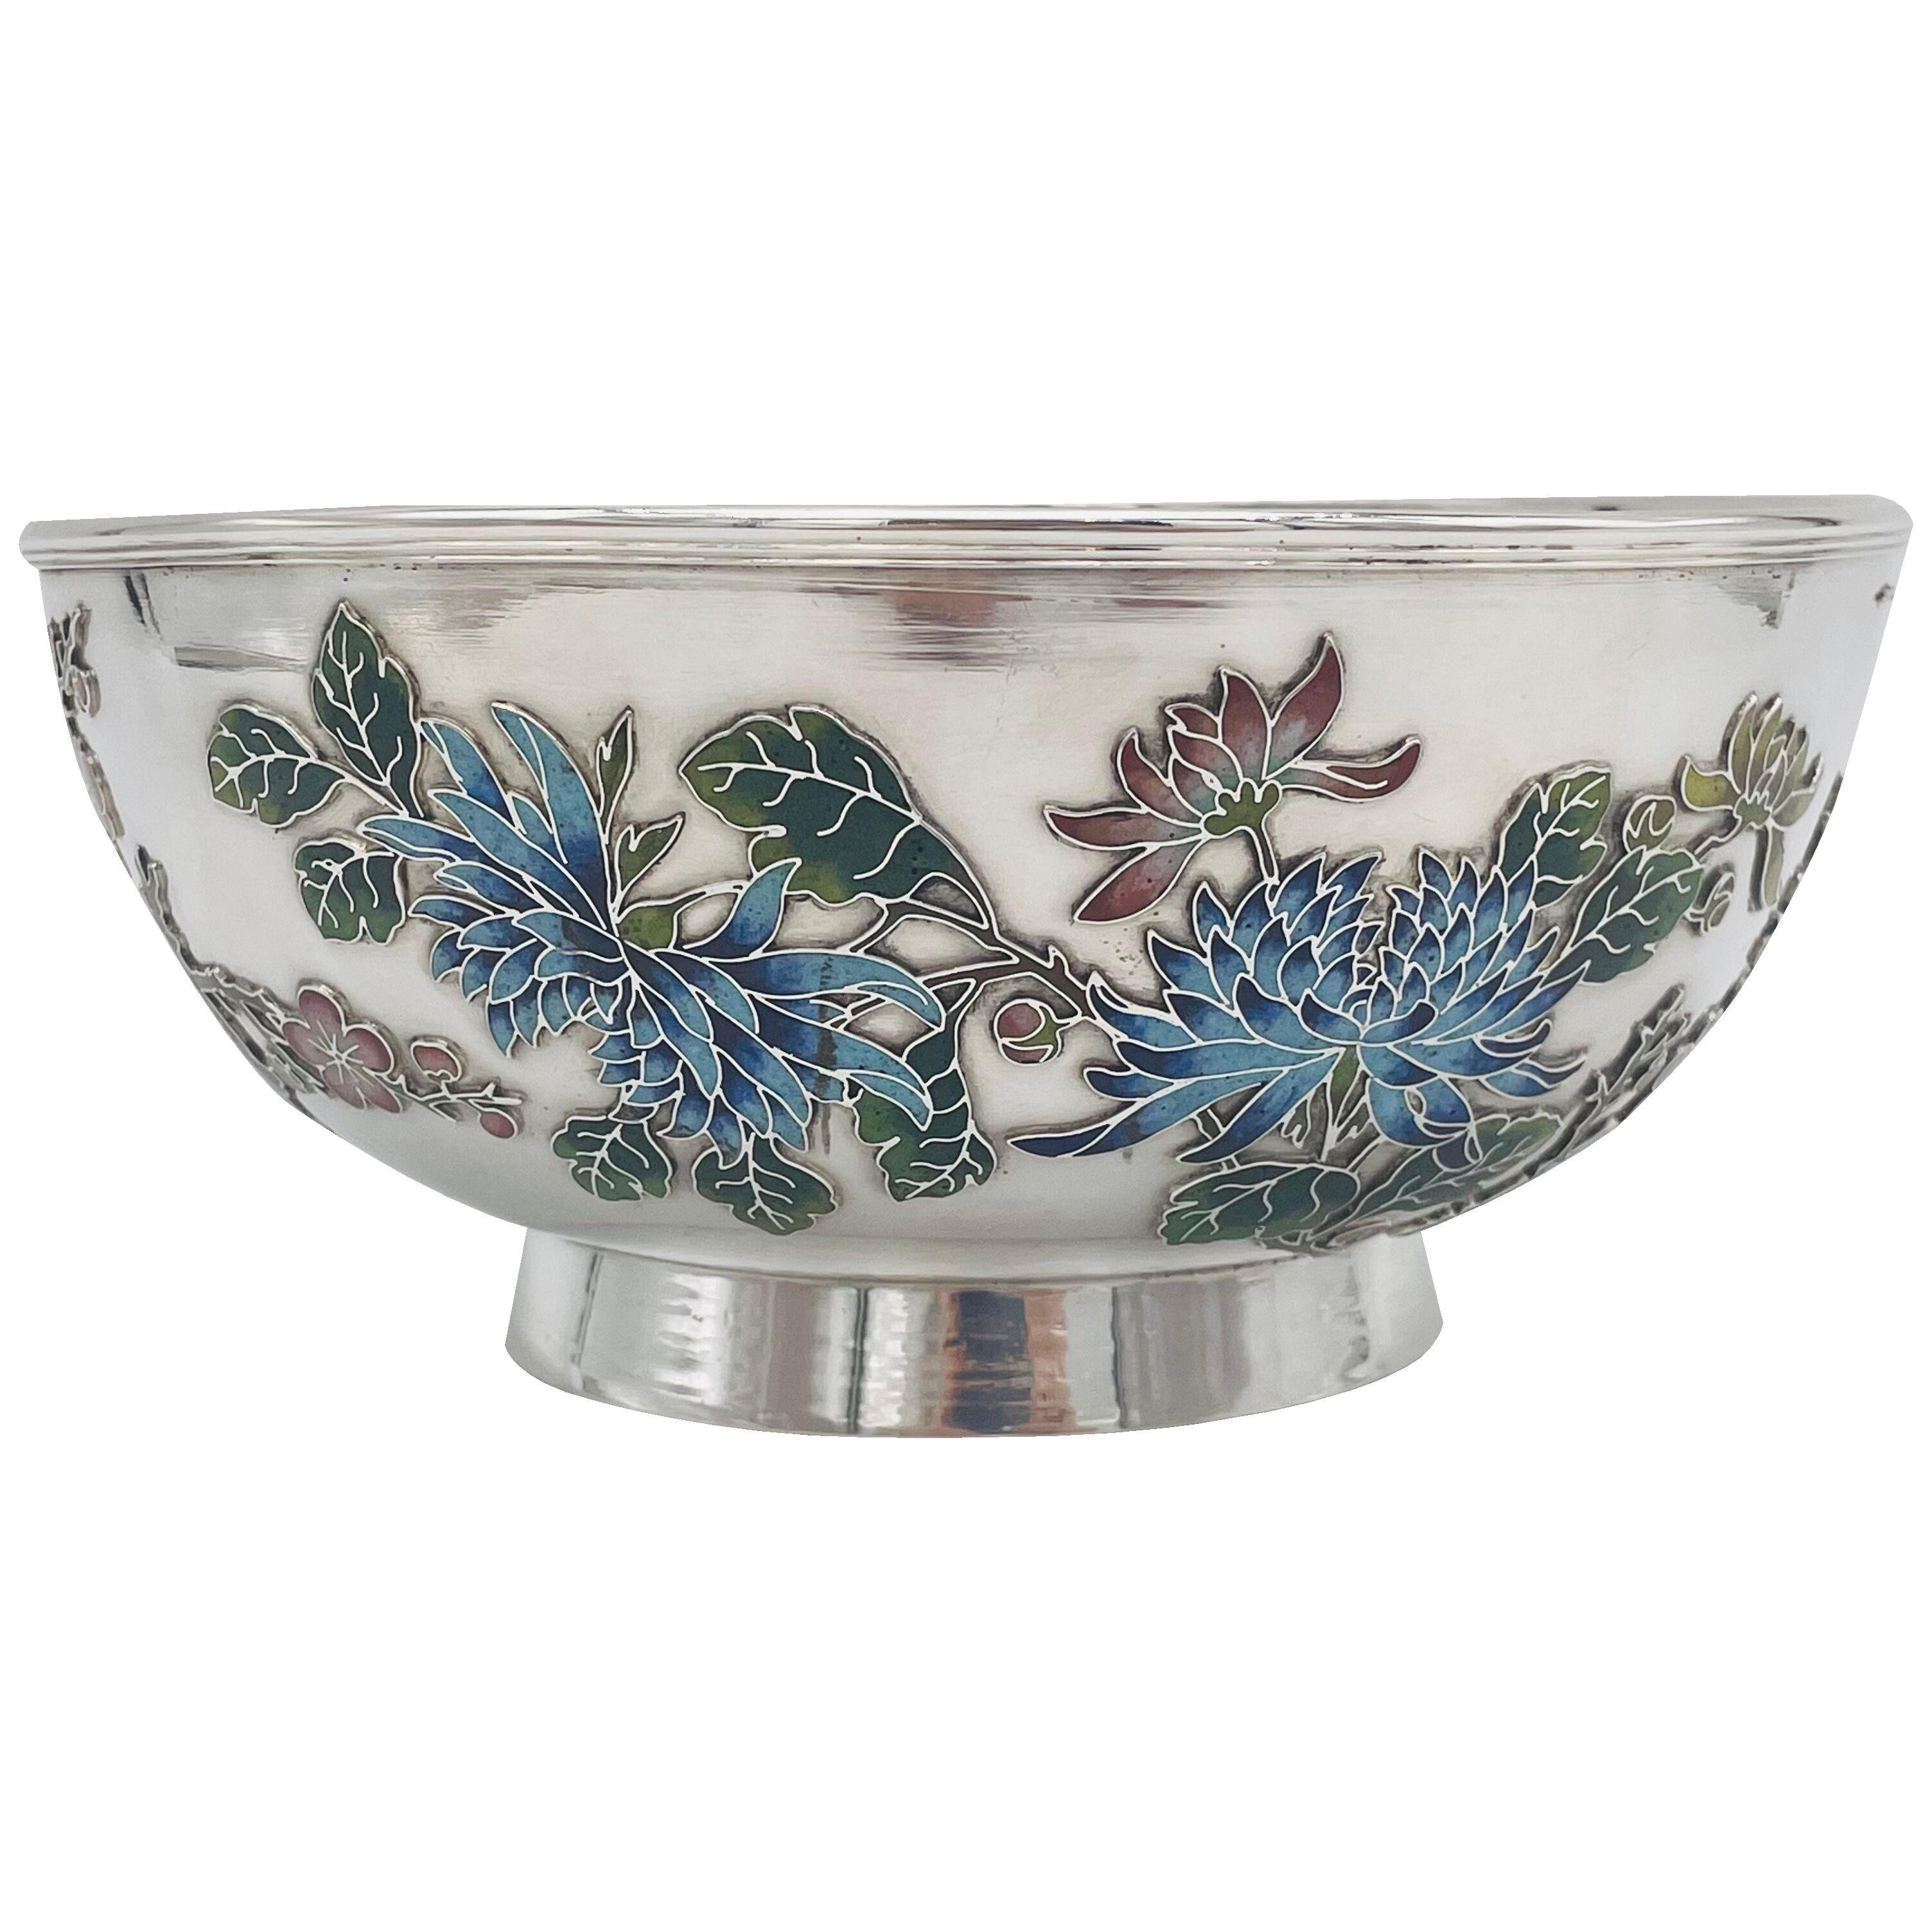 Chinese Export Silver & Enamel Bowl